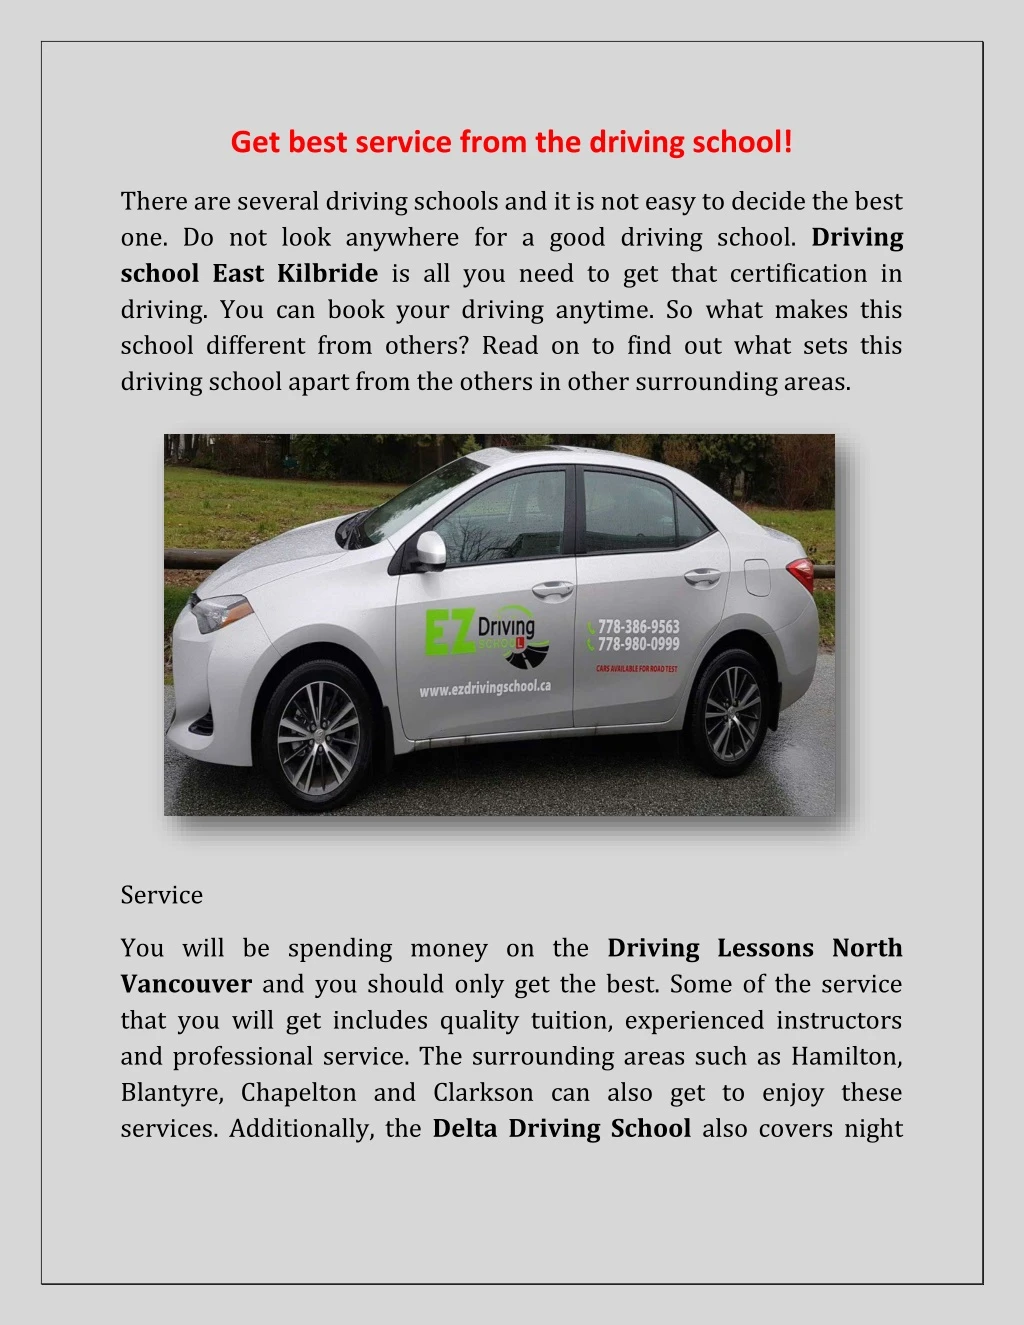 get best service from the driving school